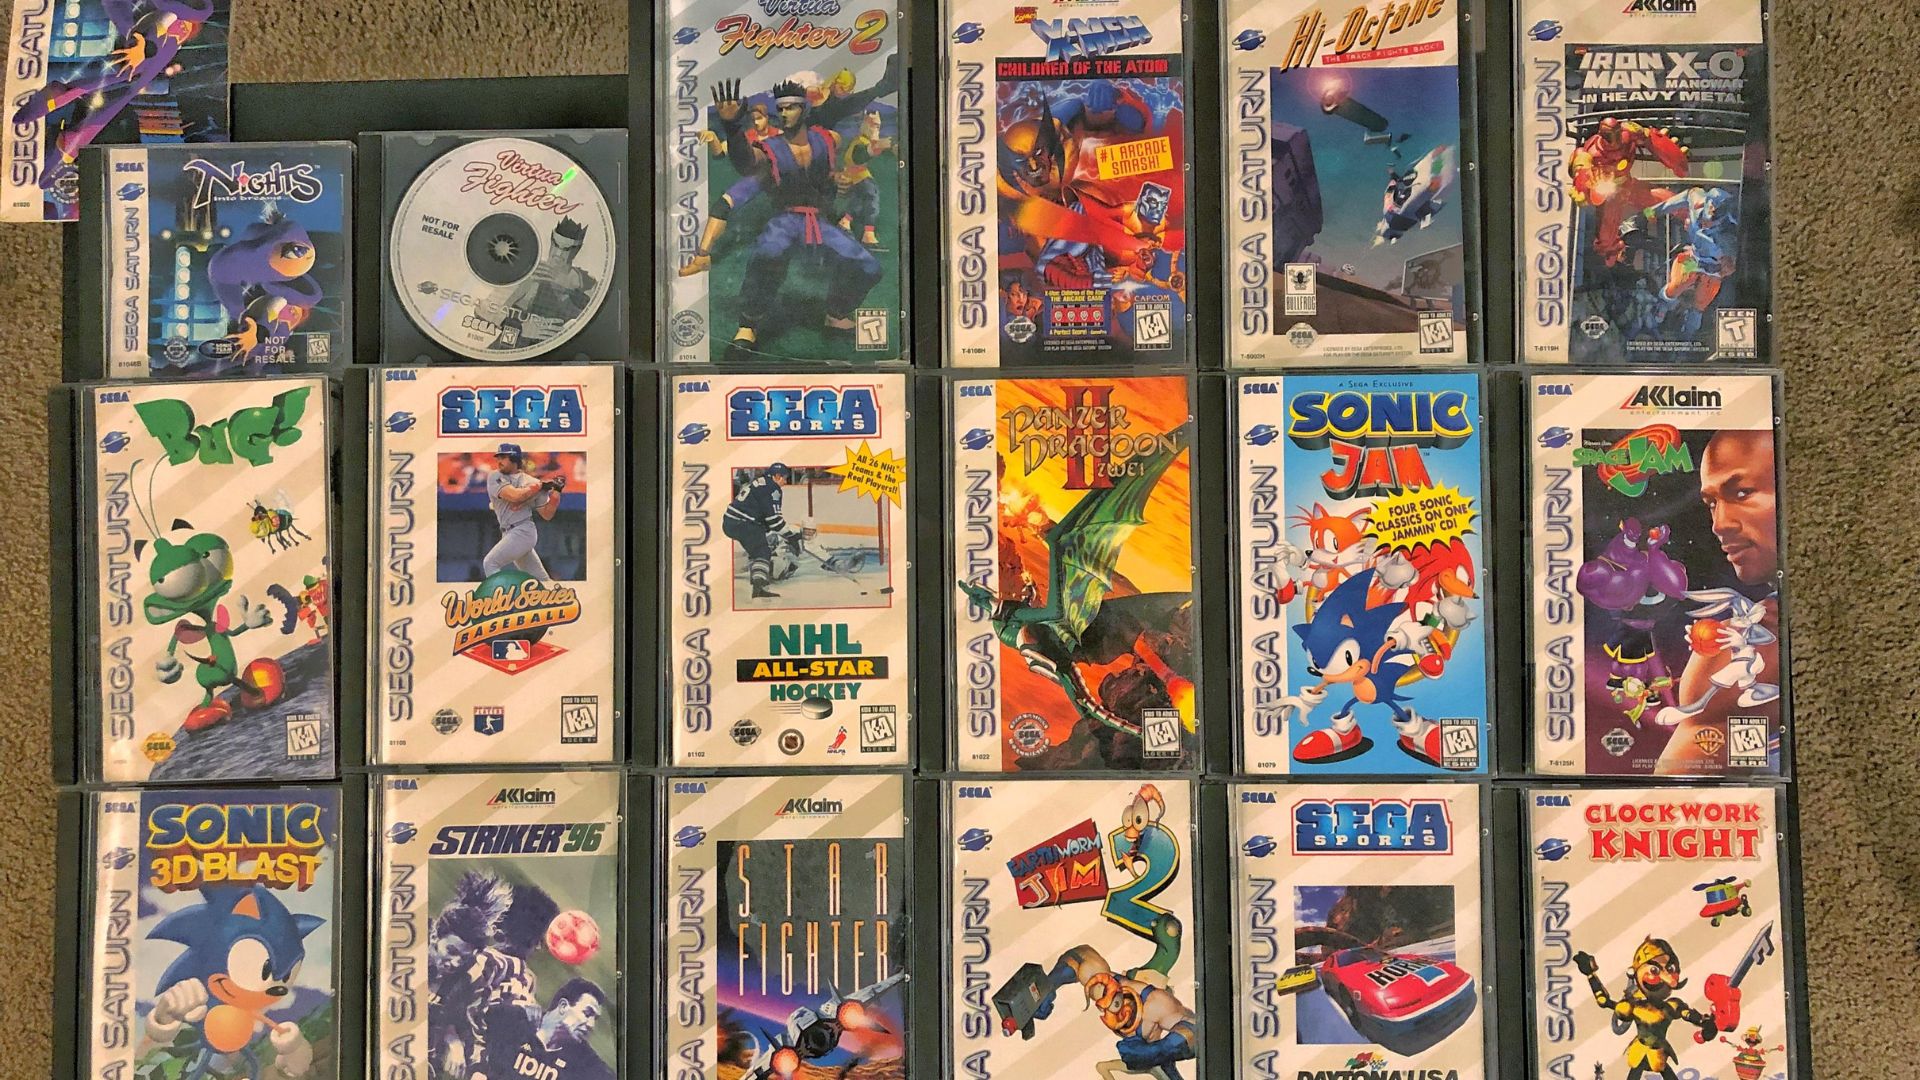 Sega Saturn Games From the Millenial's Childhood